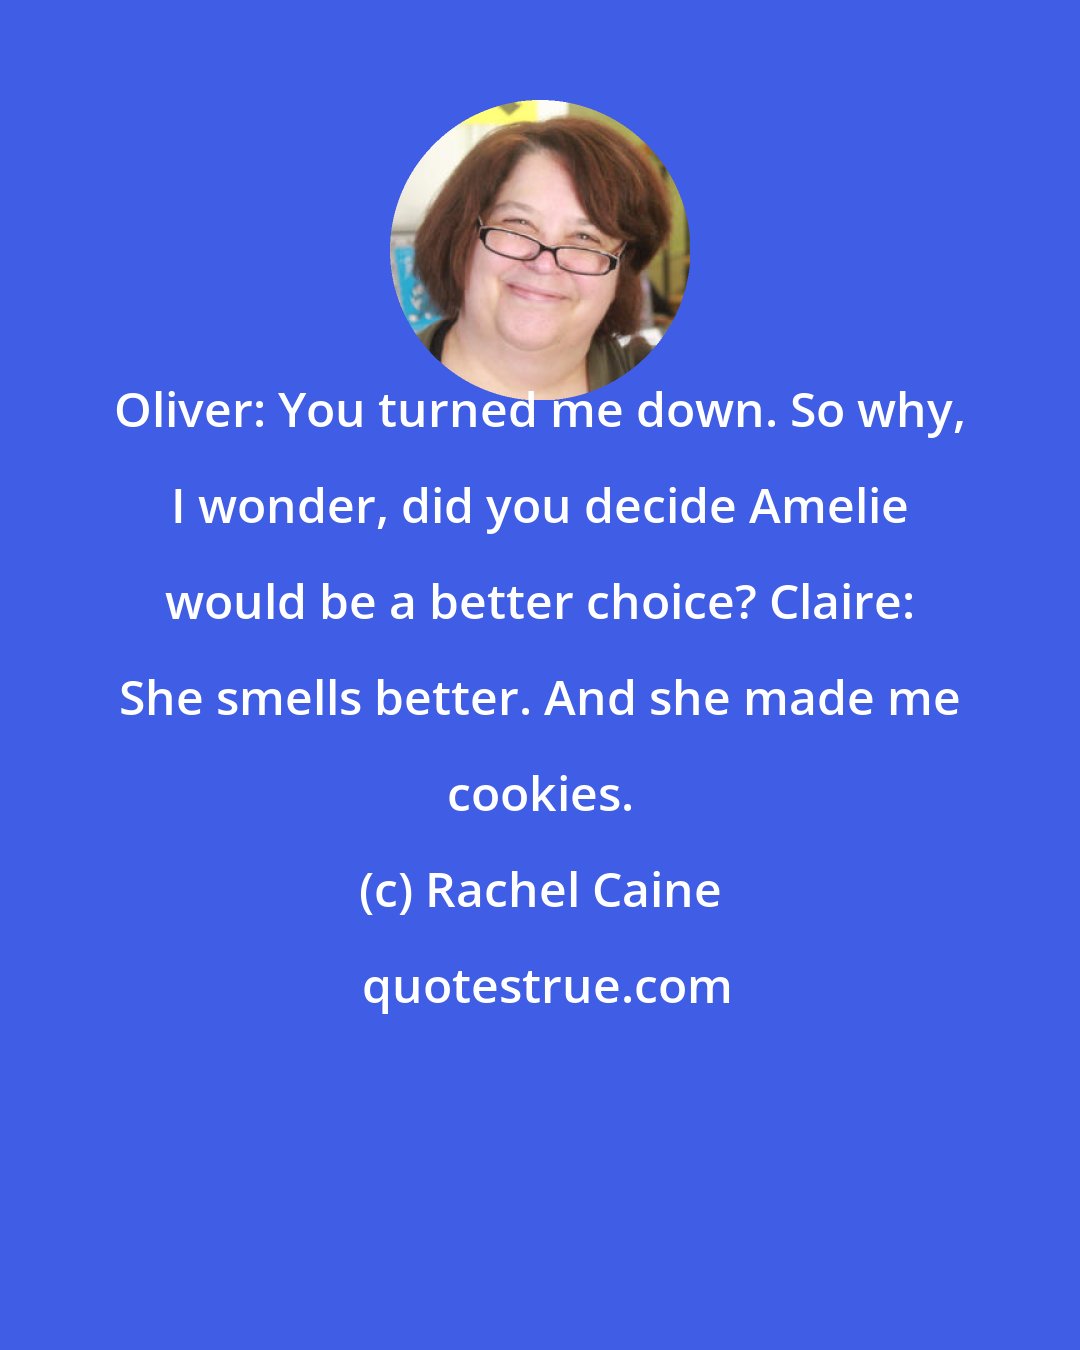 Rachel Caine: Oliver: You turned me down. So why, I wonder, did you decide Amelie would be a better choice? Claire: She smells better. And she made me cookies.